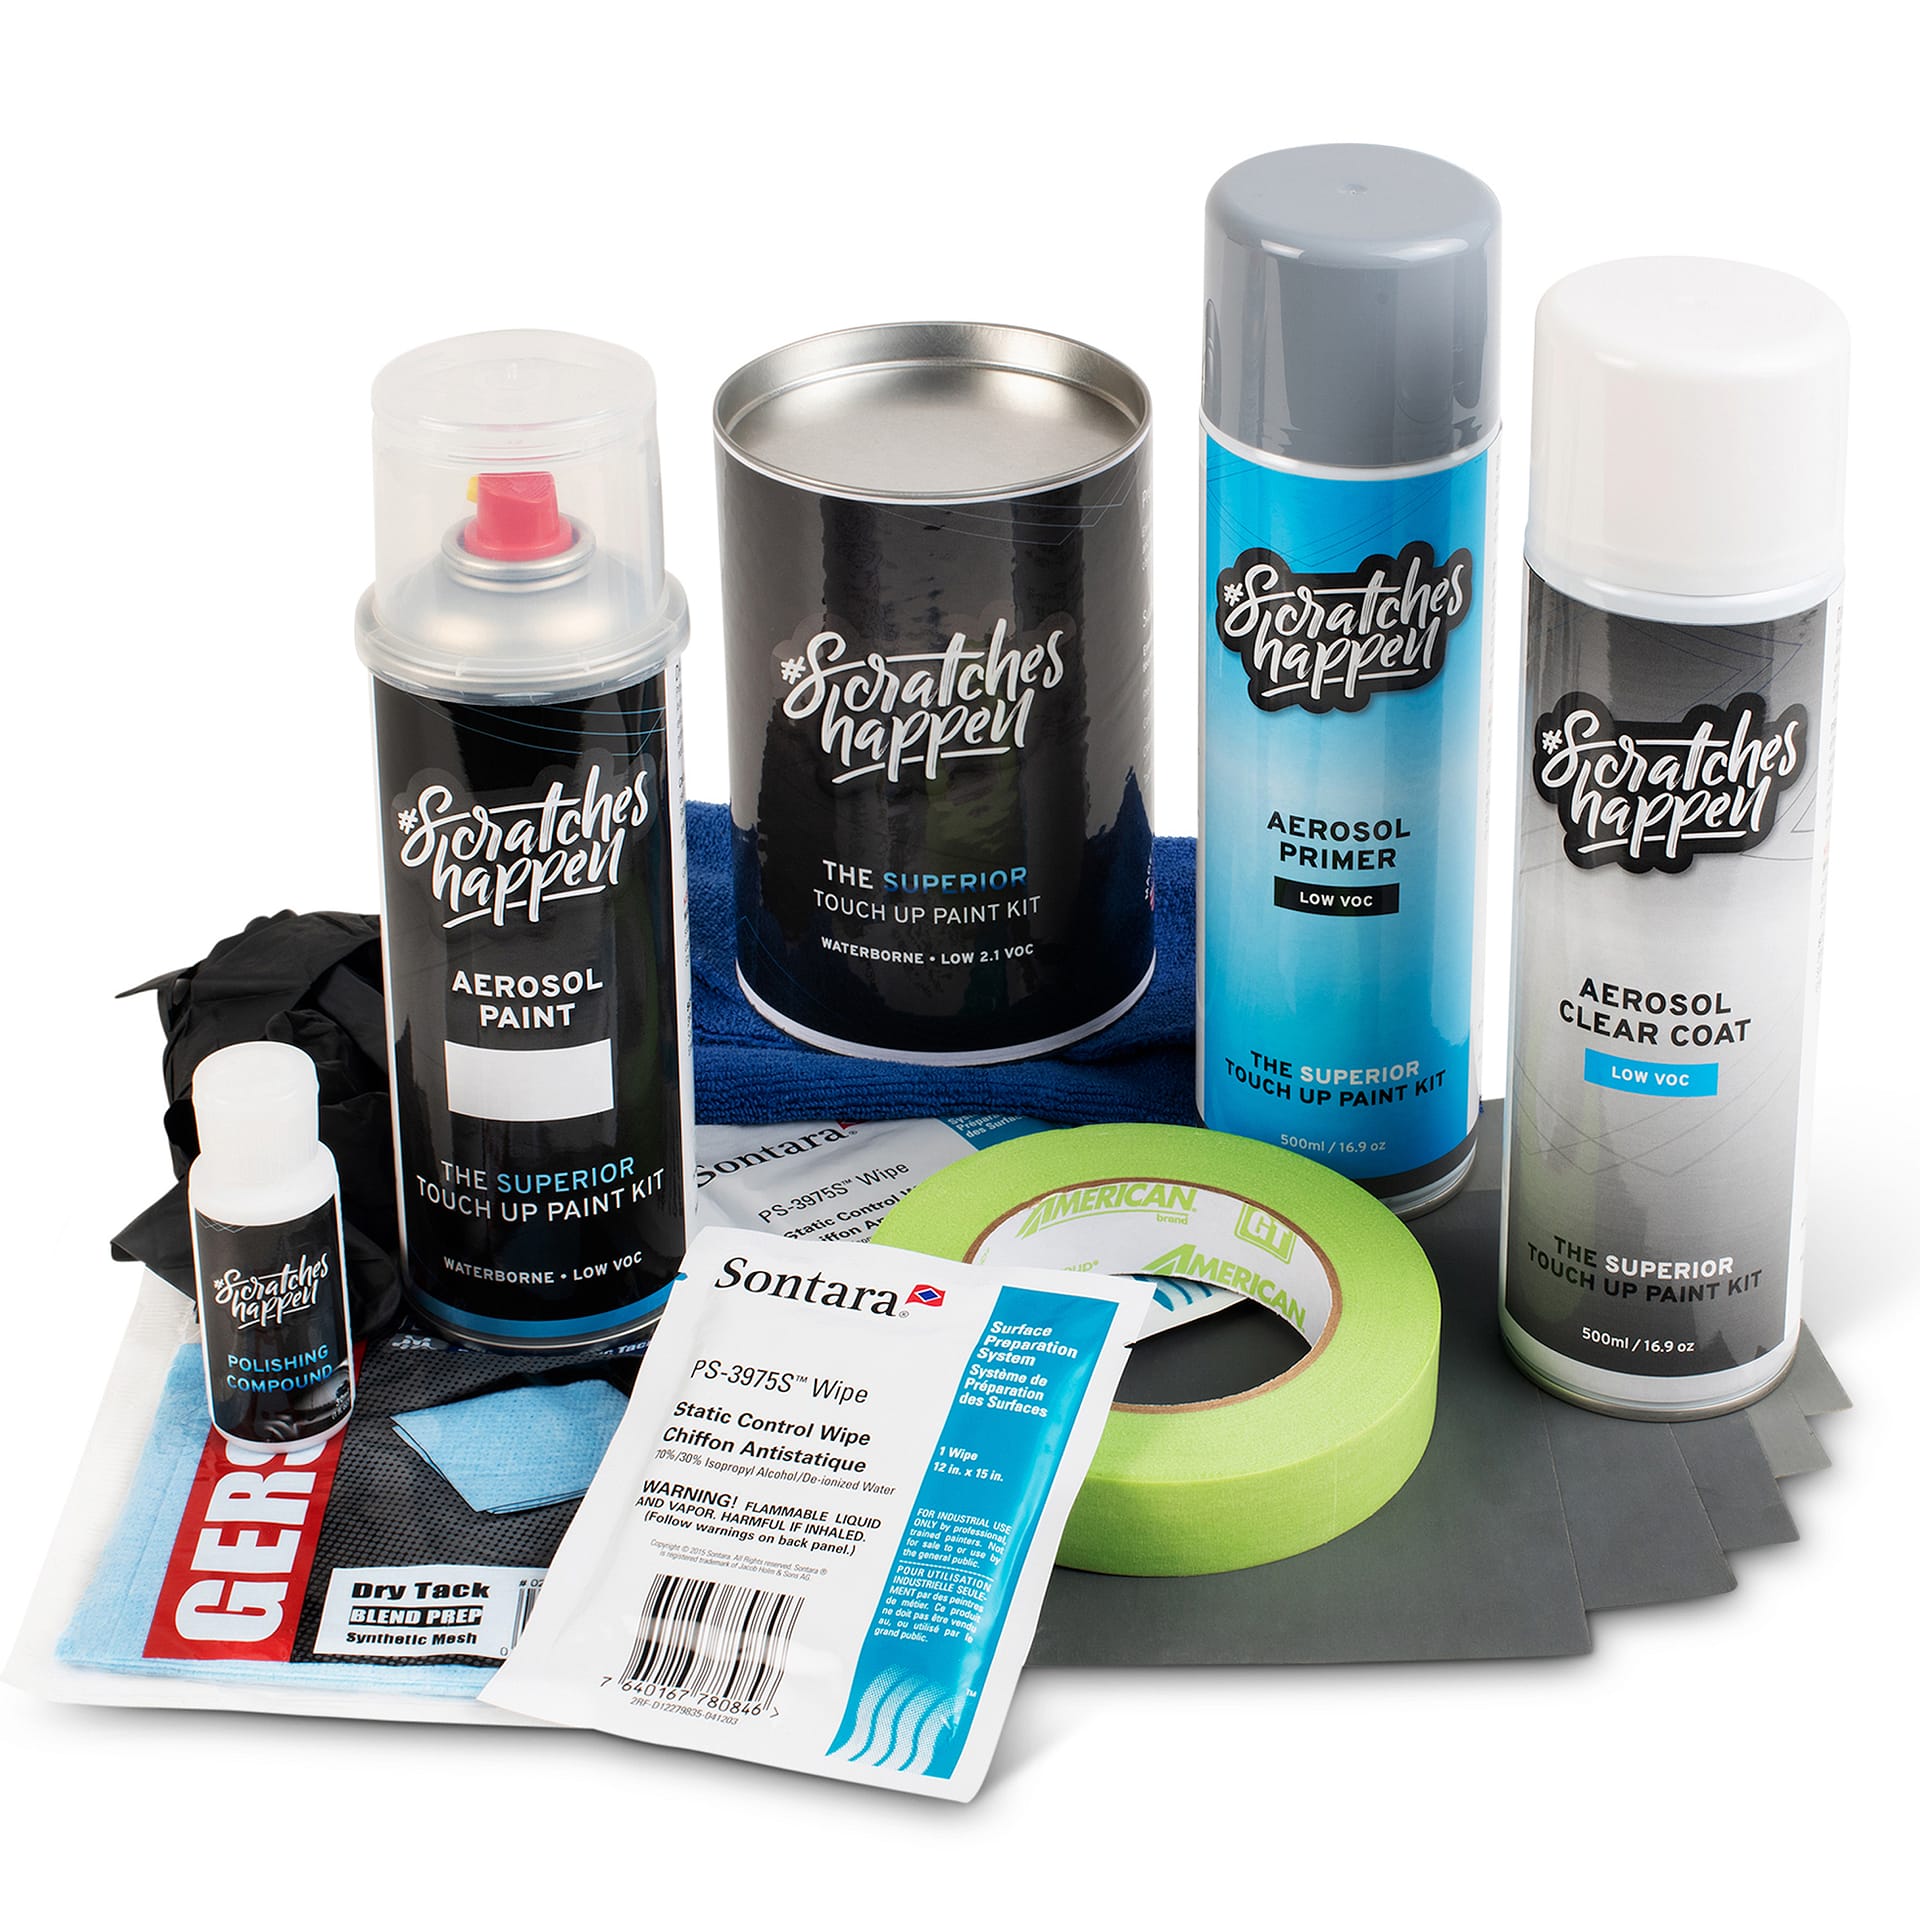 Hyundai Cyber Gray/Cyber Silver (C5G) Touch Up Paint | ScratchesHappen